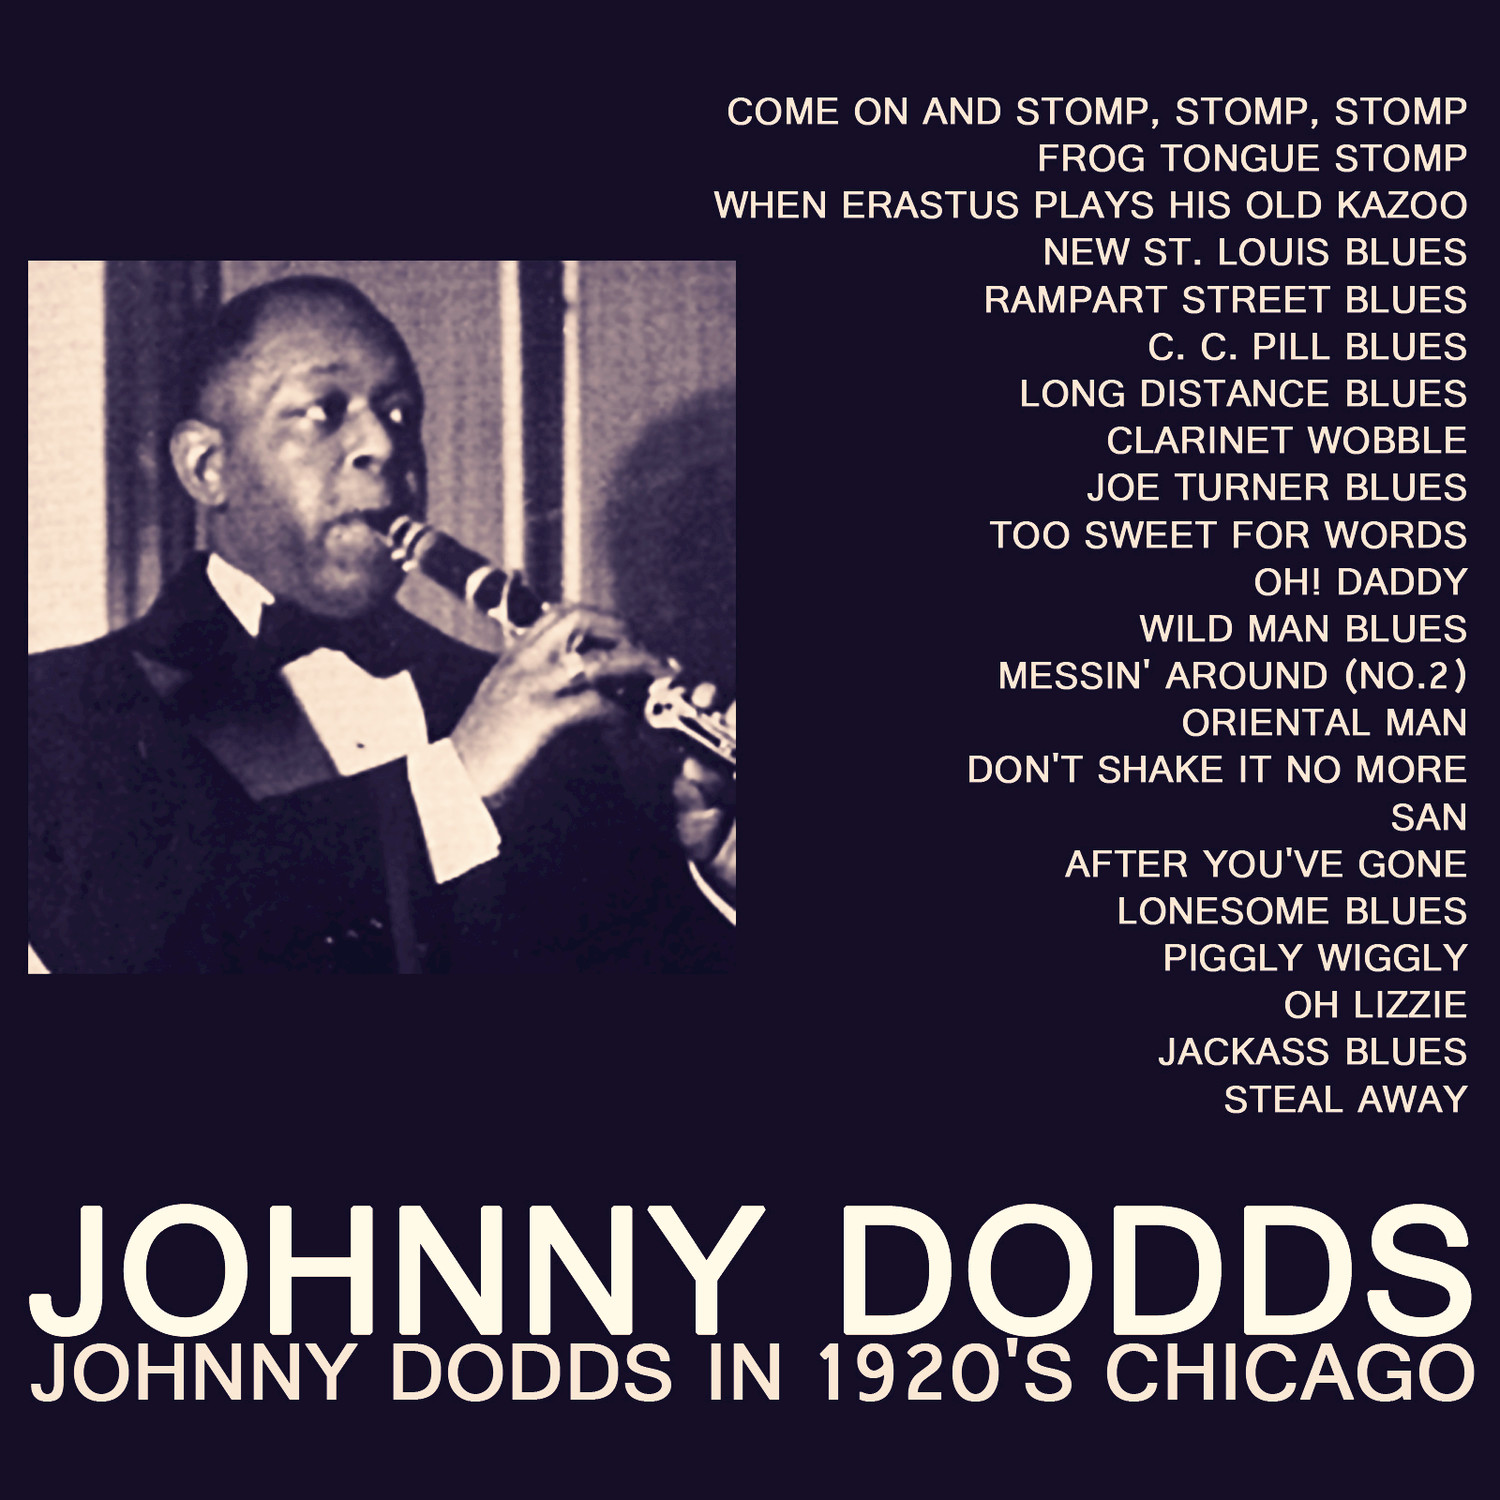 Johnny Dodds in 1920's Chicago